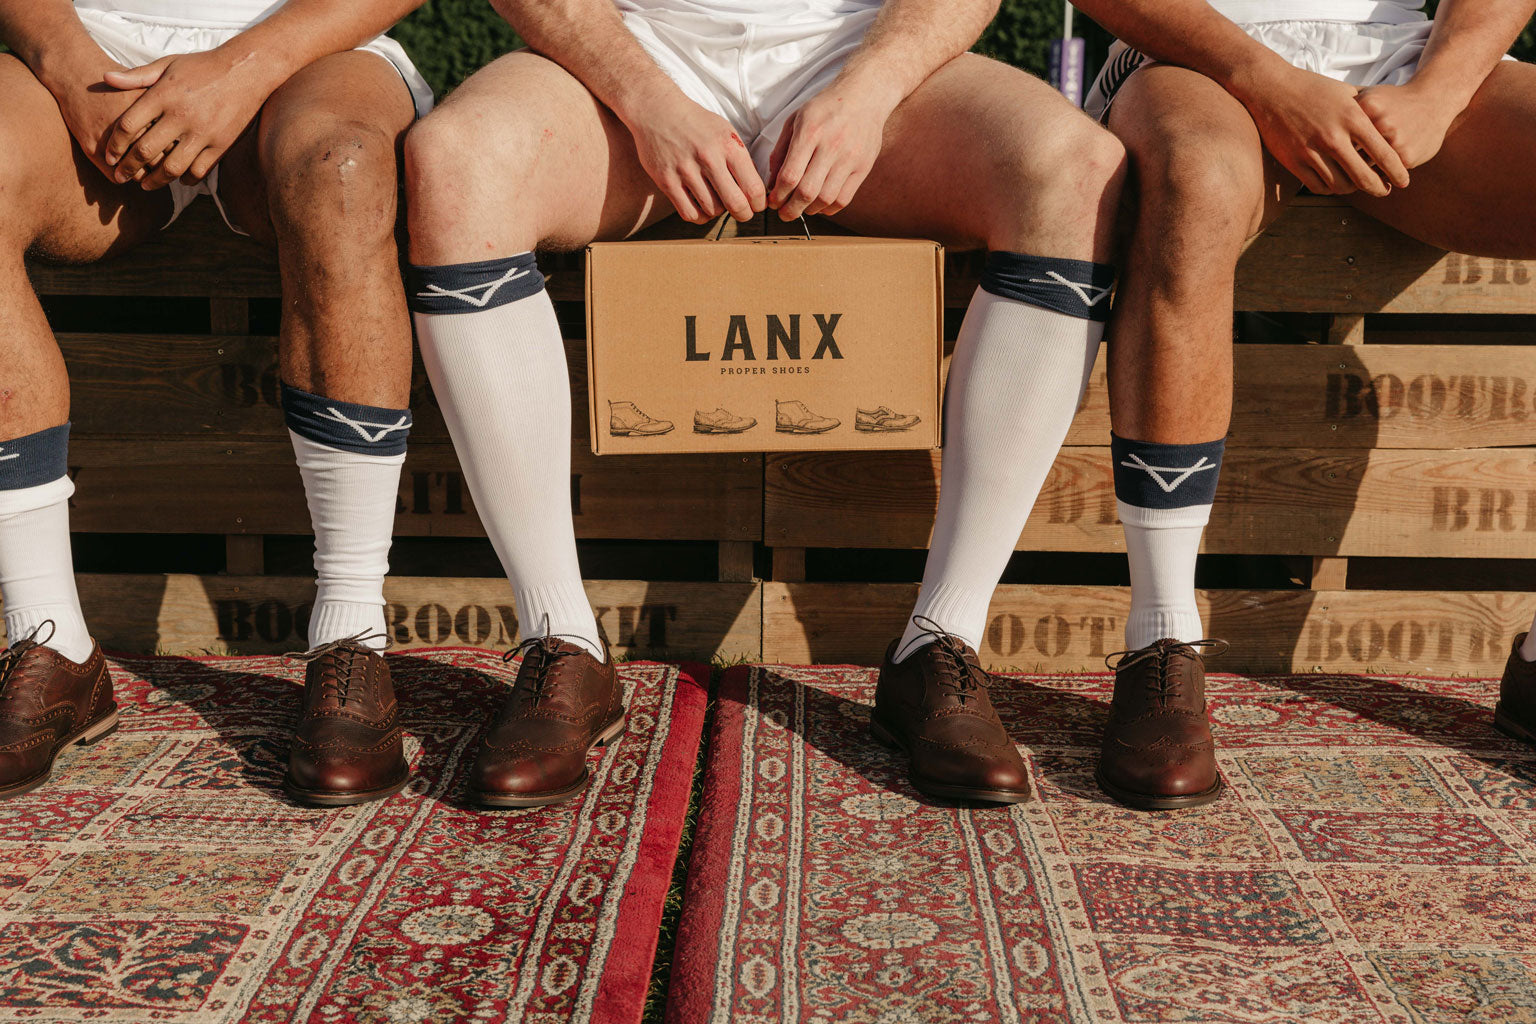 LANX England Rugby League Brogues